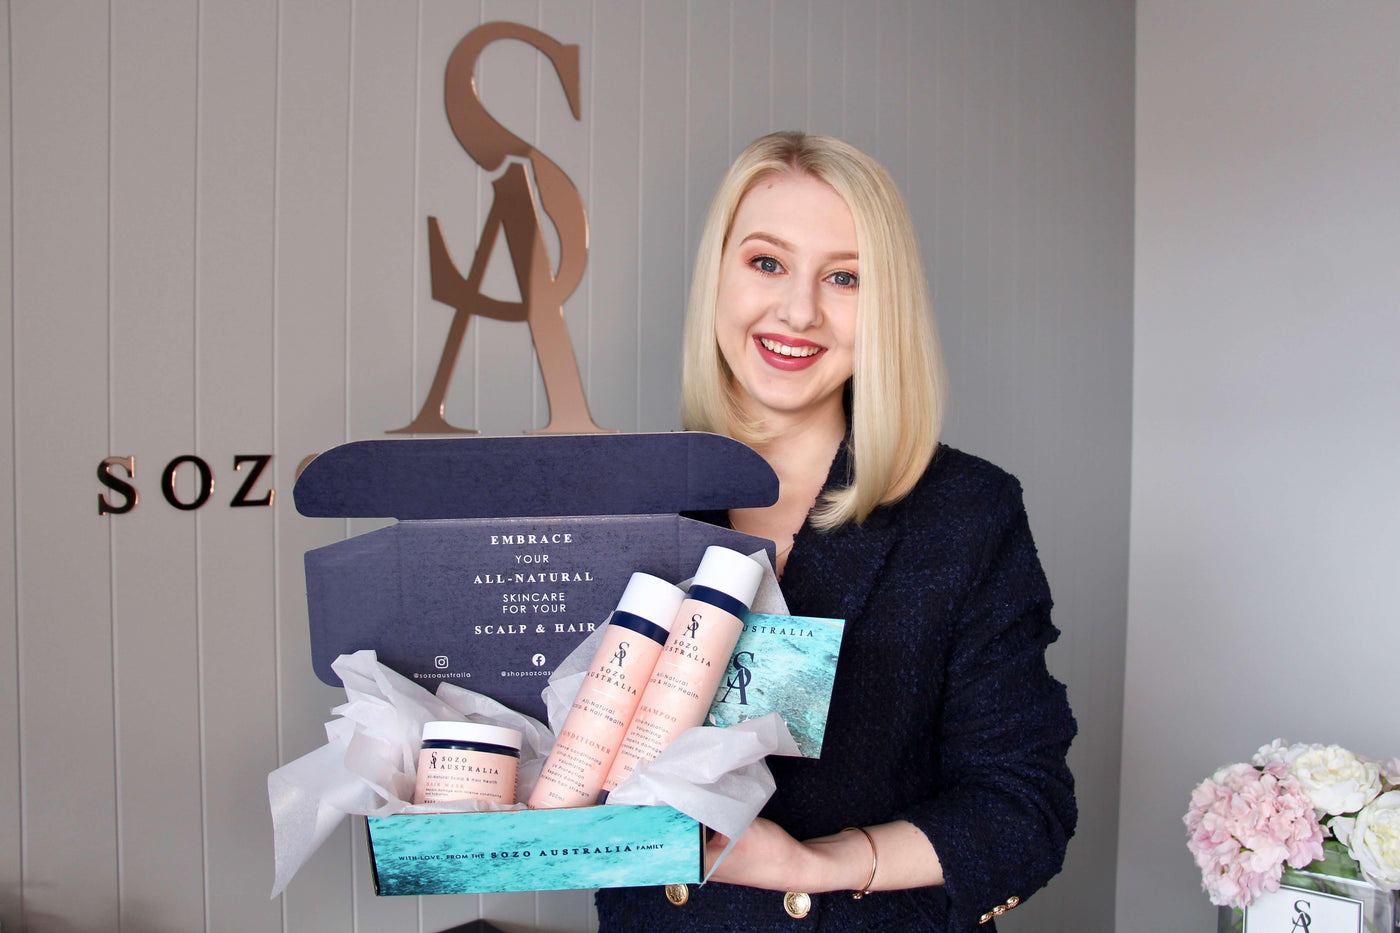 Sozo Australia's founder holding all-natural haircare bundle set containing Australian made shampoo, conditioner and hair mask